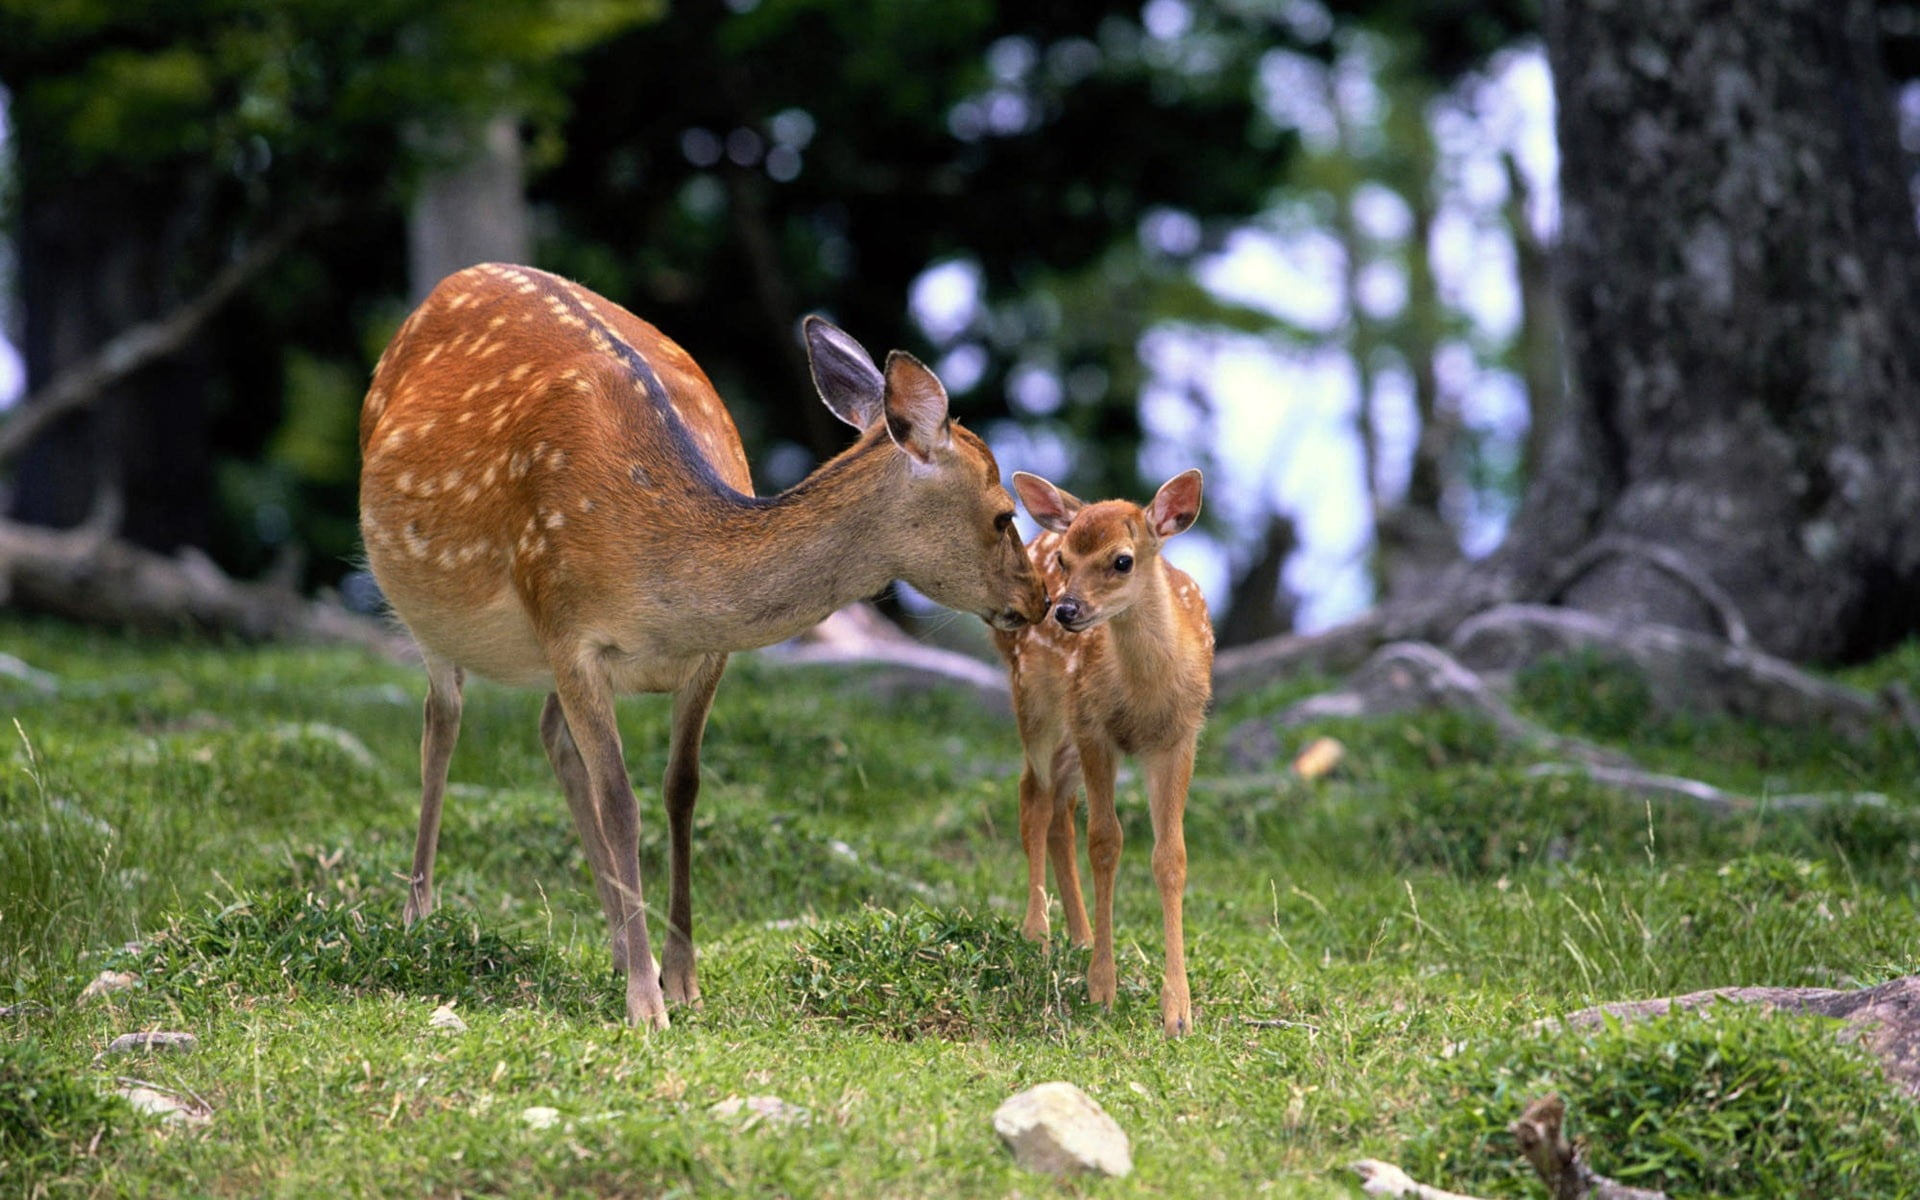 two white spotted deers, baby, grass, care, walking, wood, wildlife